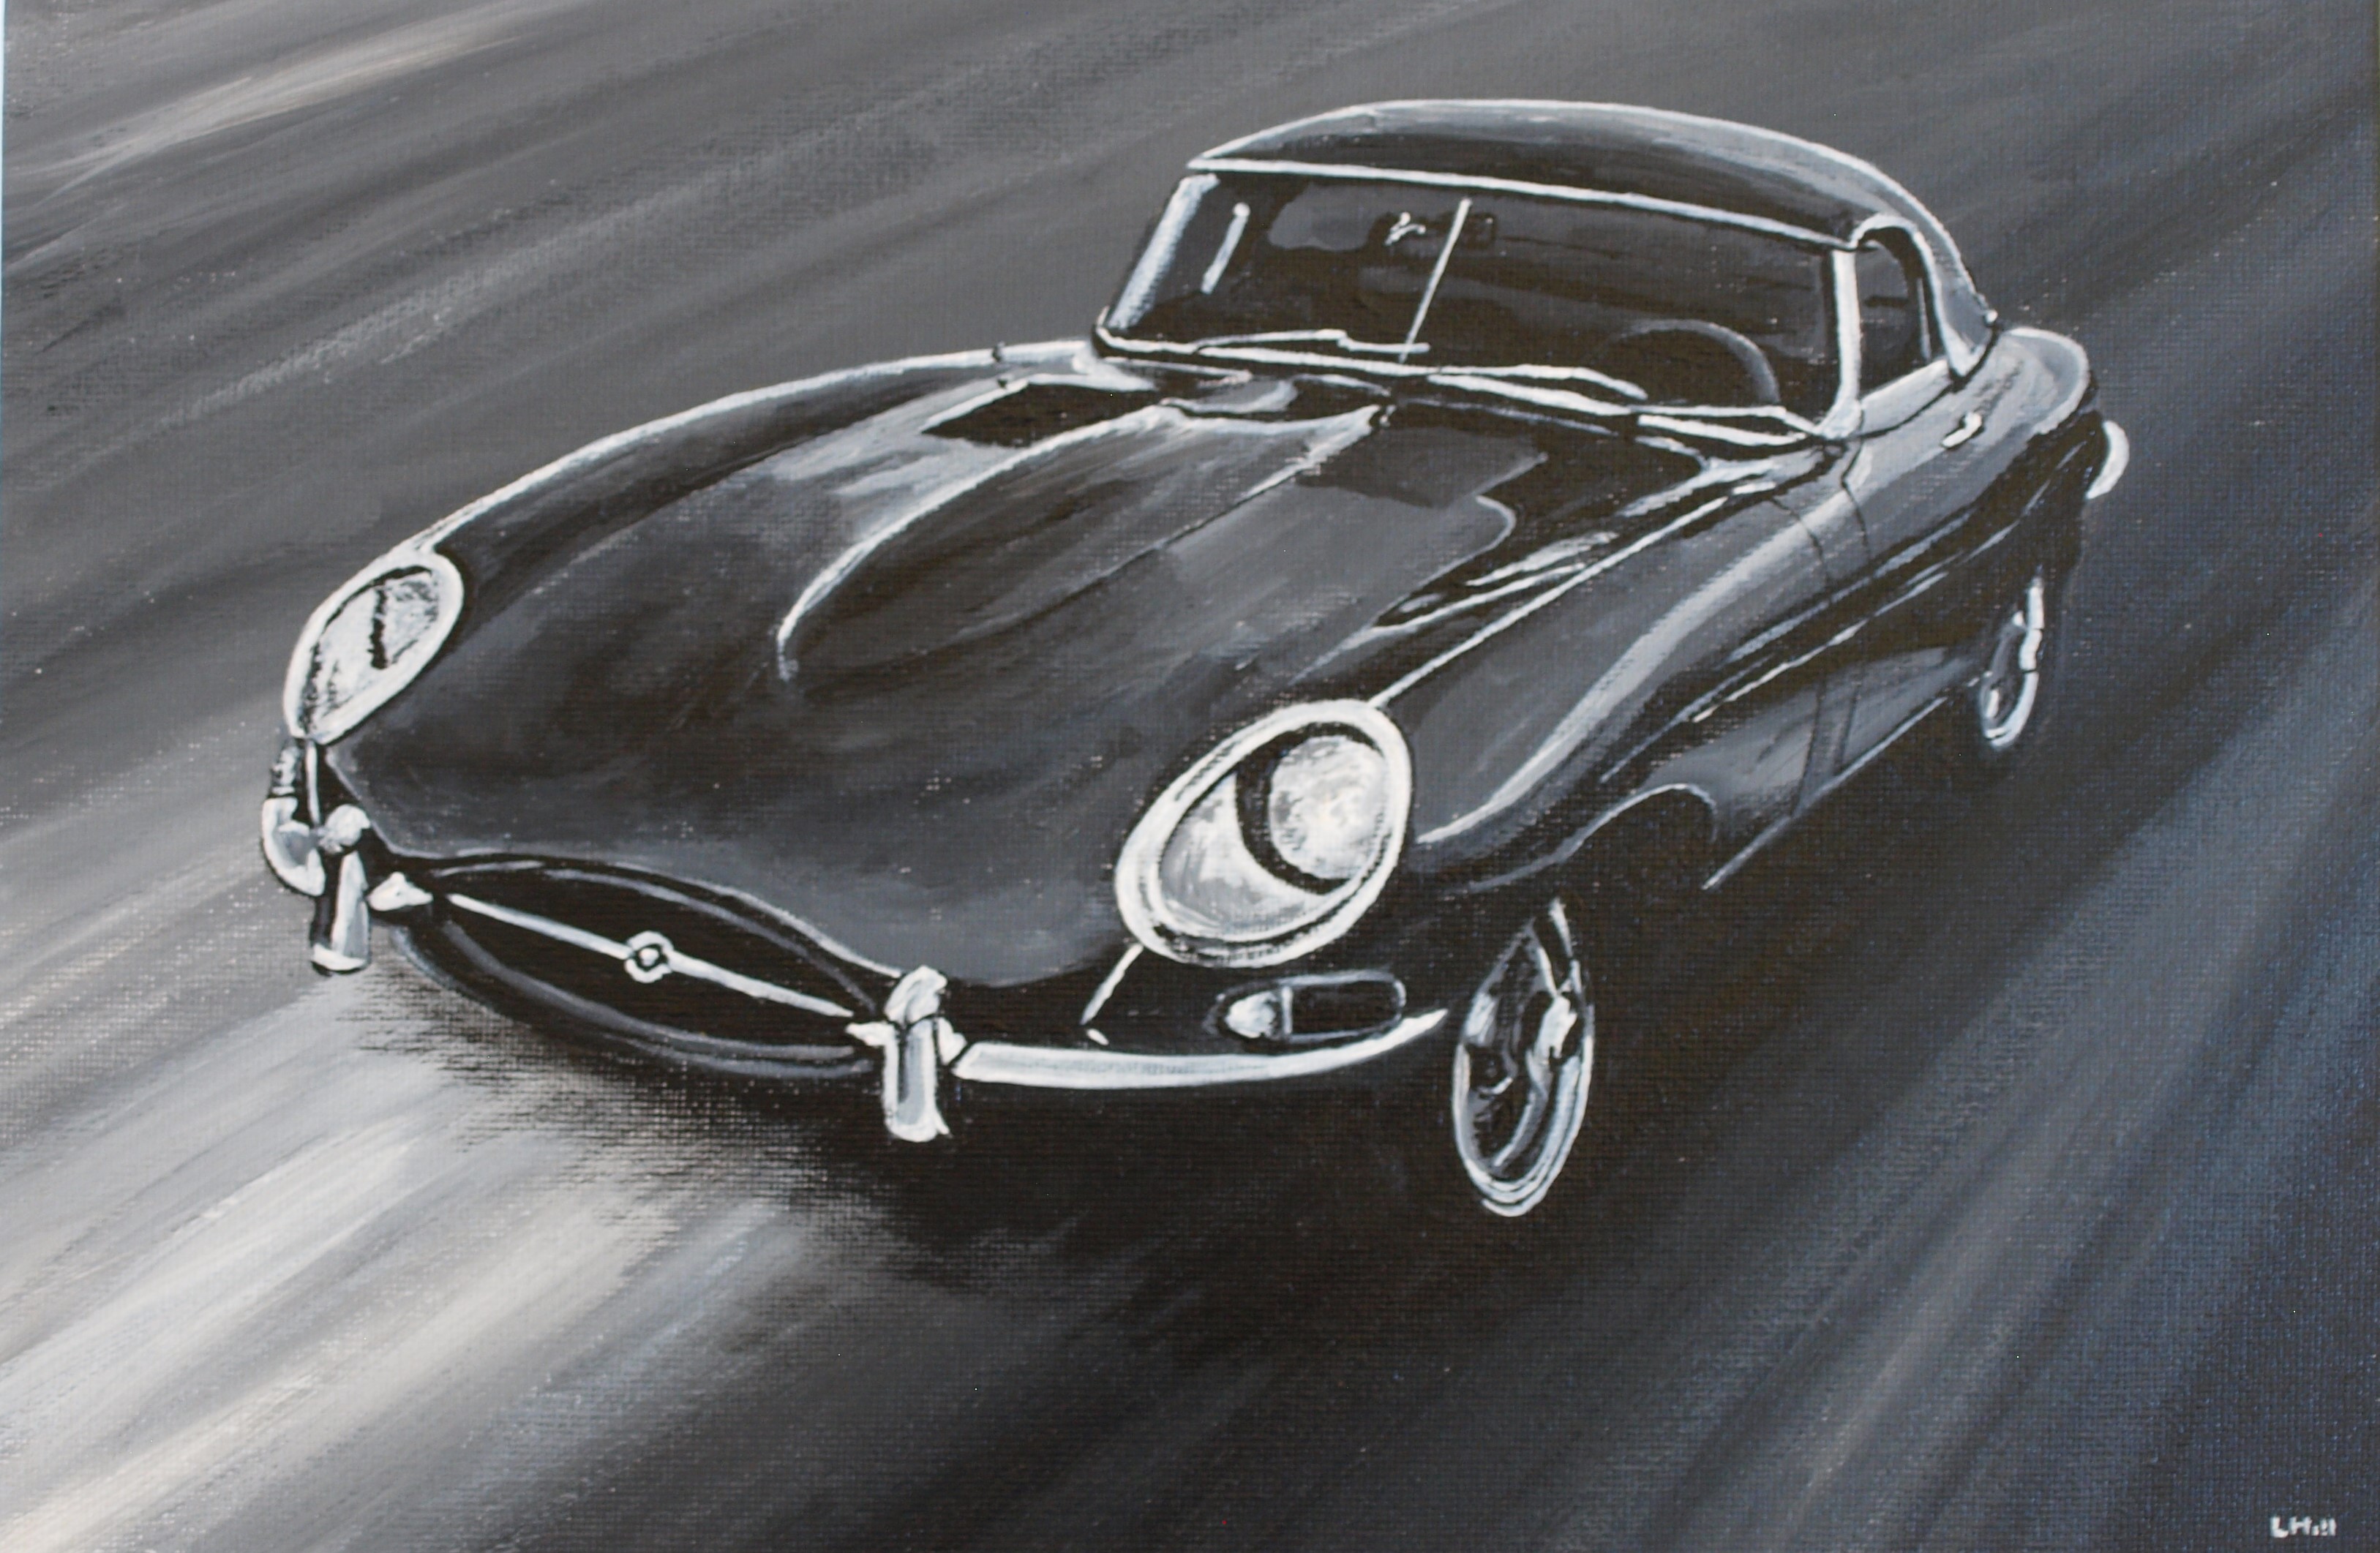 Jaguar E-type acrylic painting by Louisa Hill